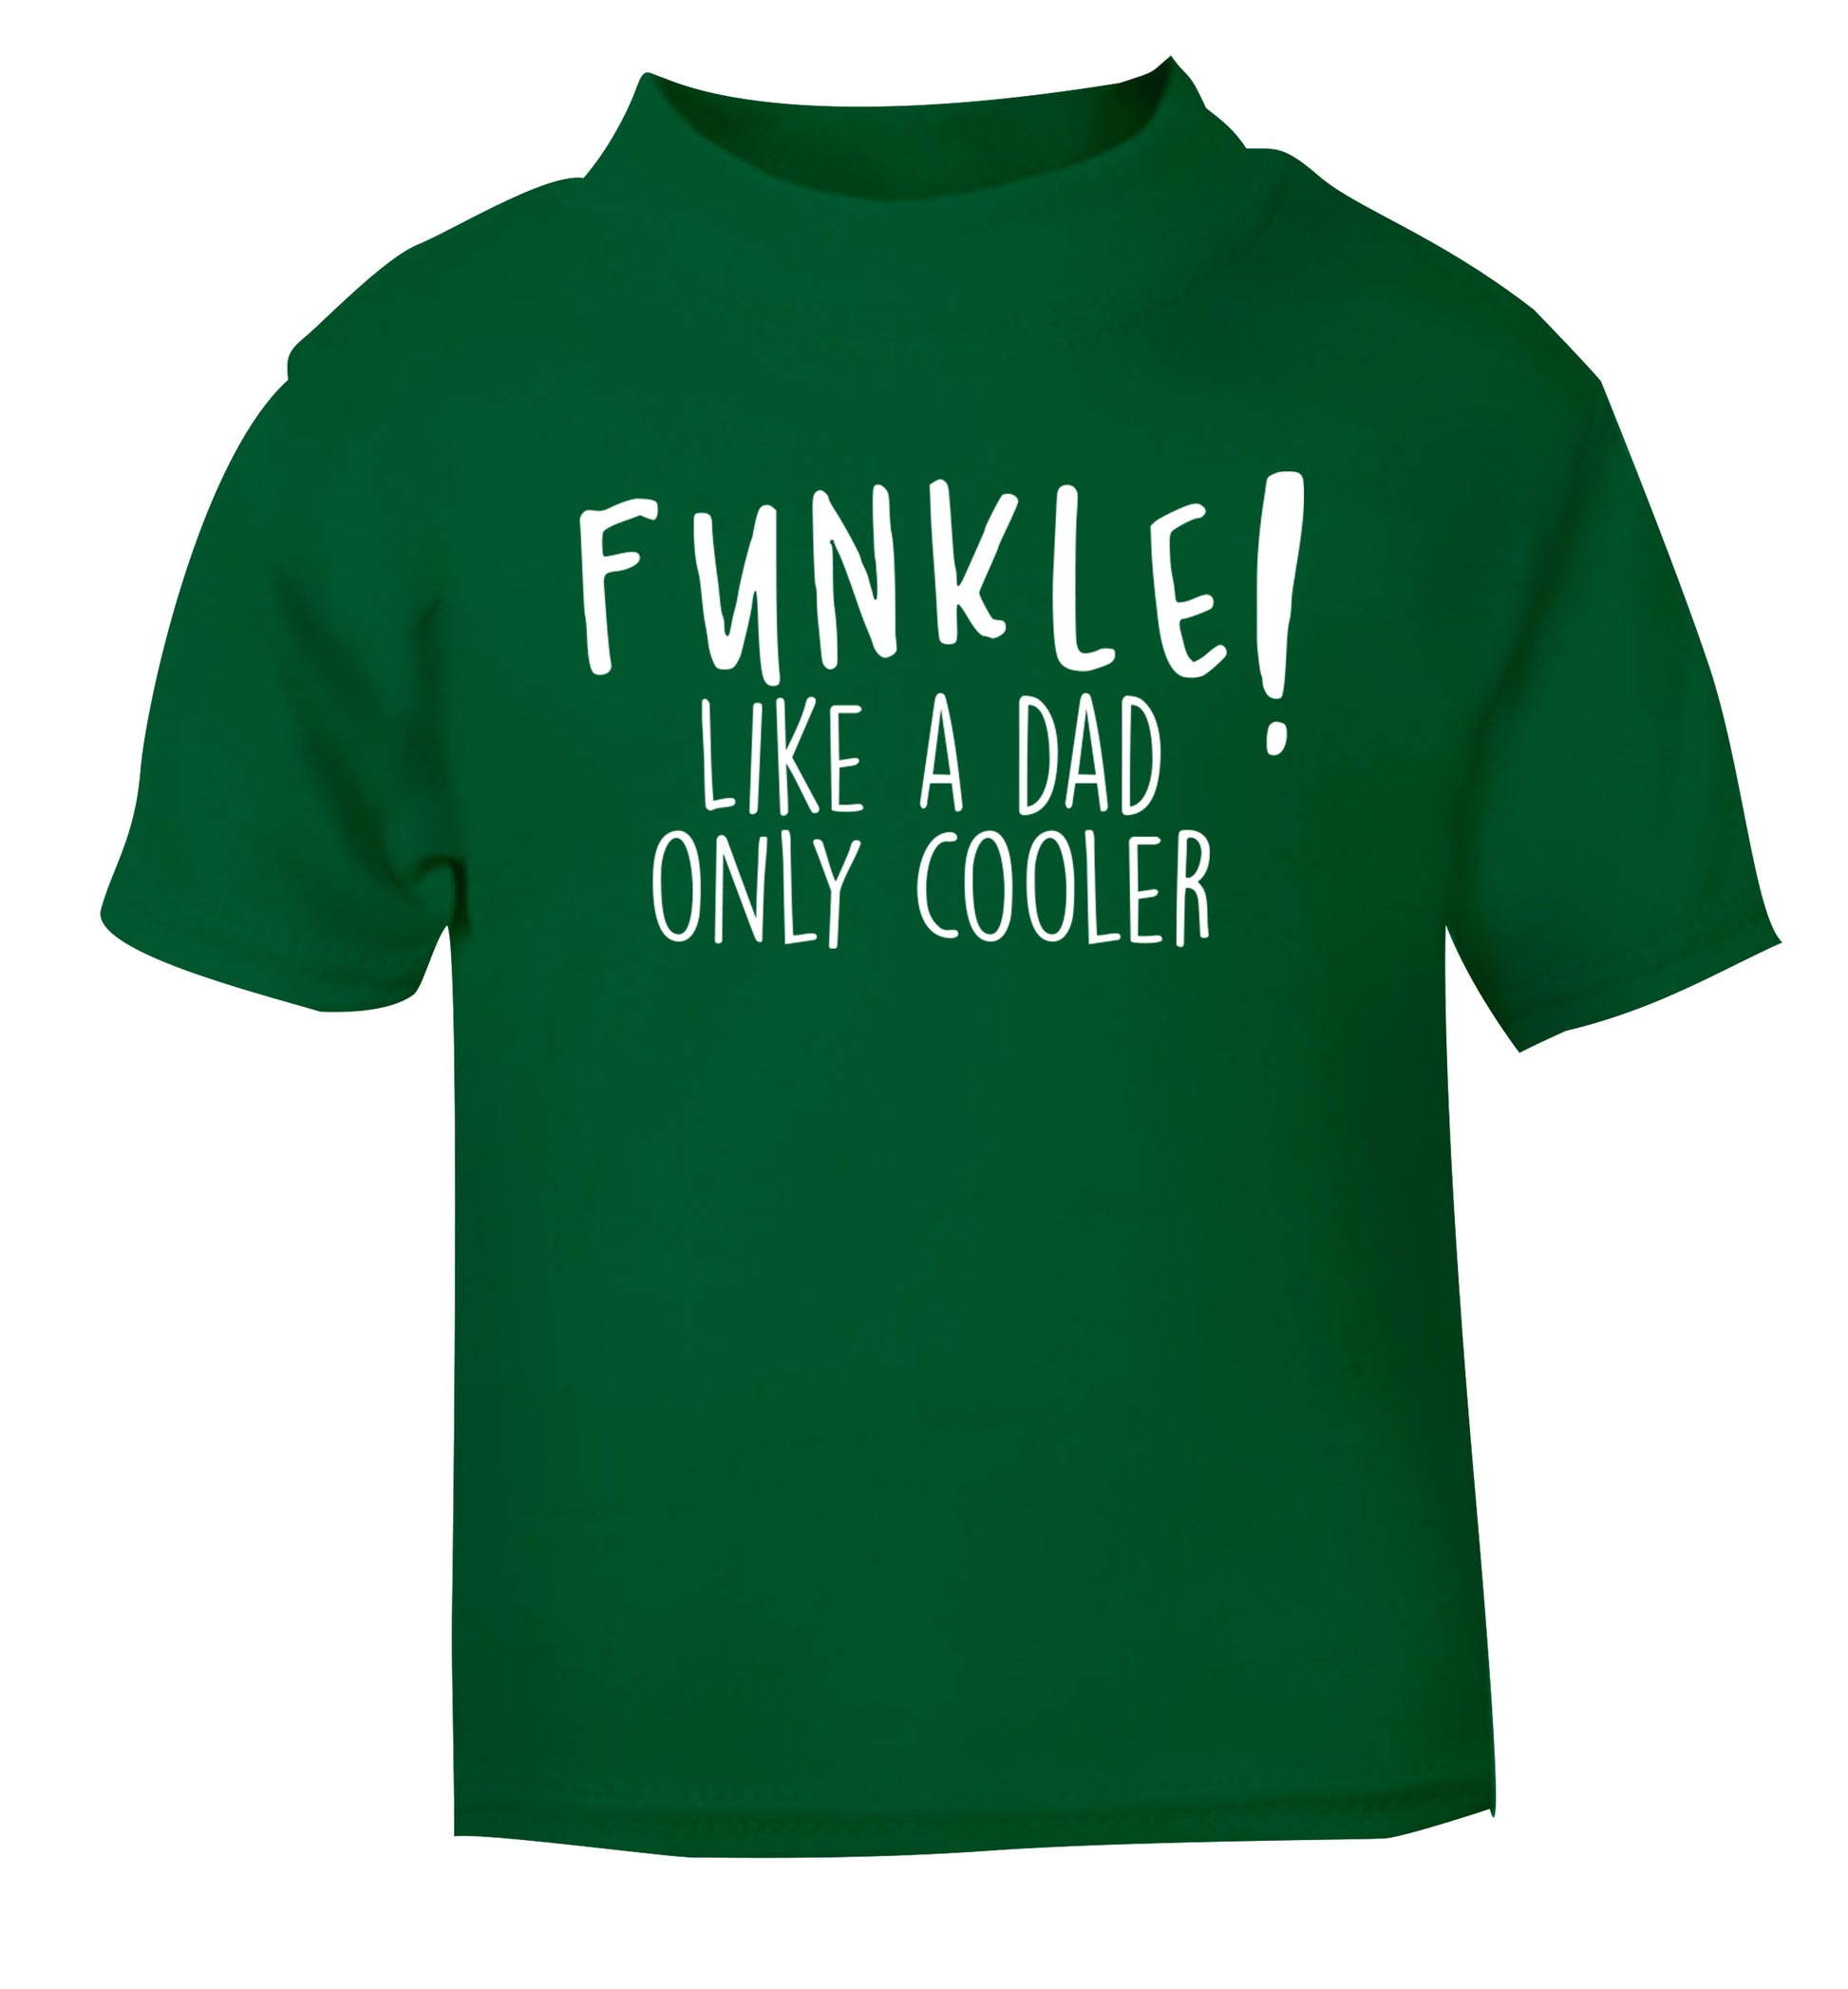 Funkle Like a Dad Only Cooler green Baby Toddler Tshirt 2 Years